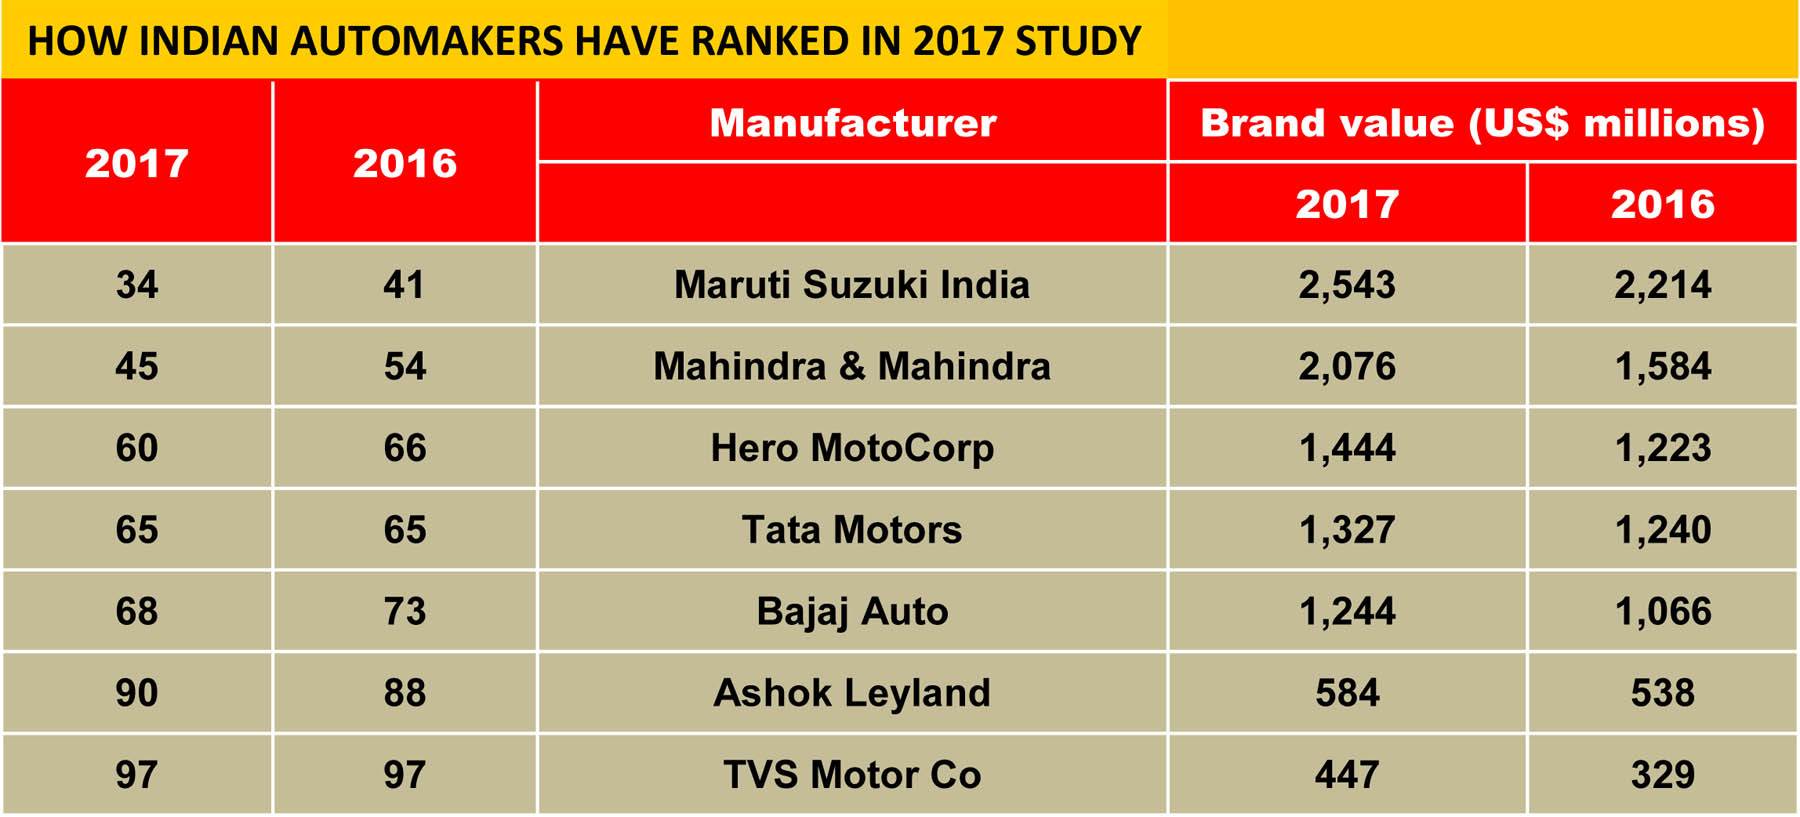 how-indian-automakers-have-ranked-in-2017-study